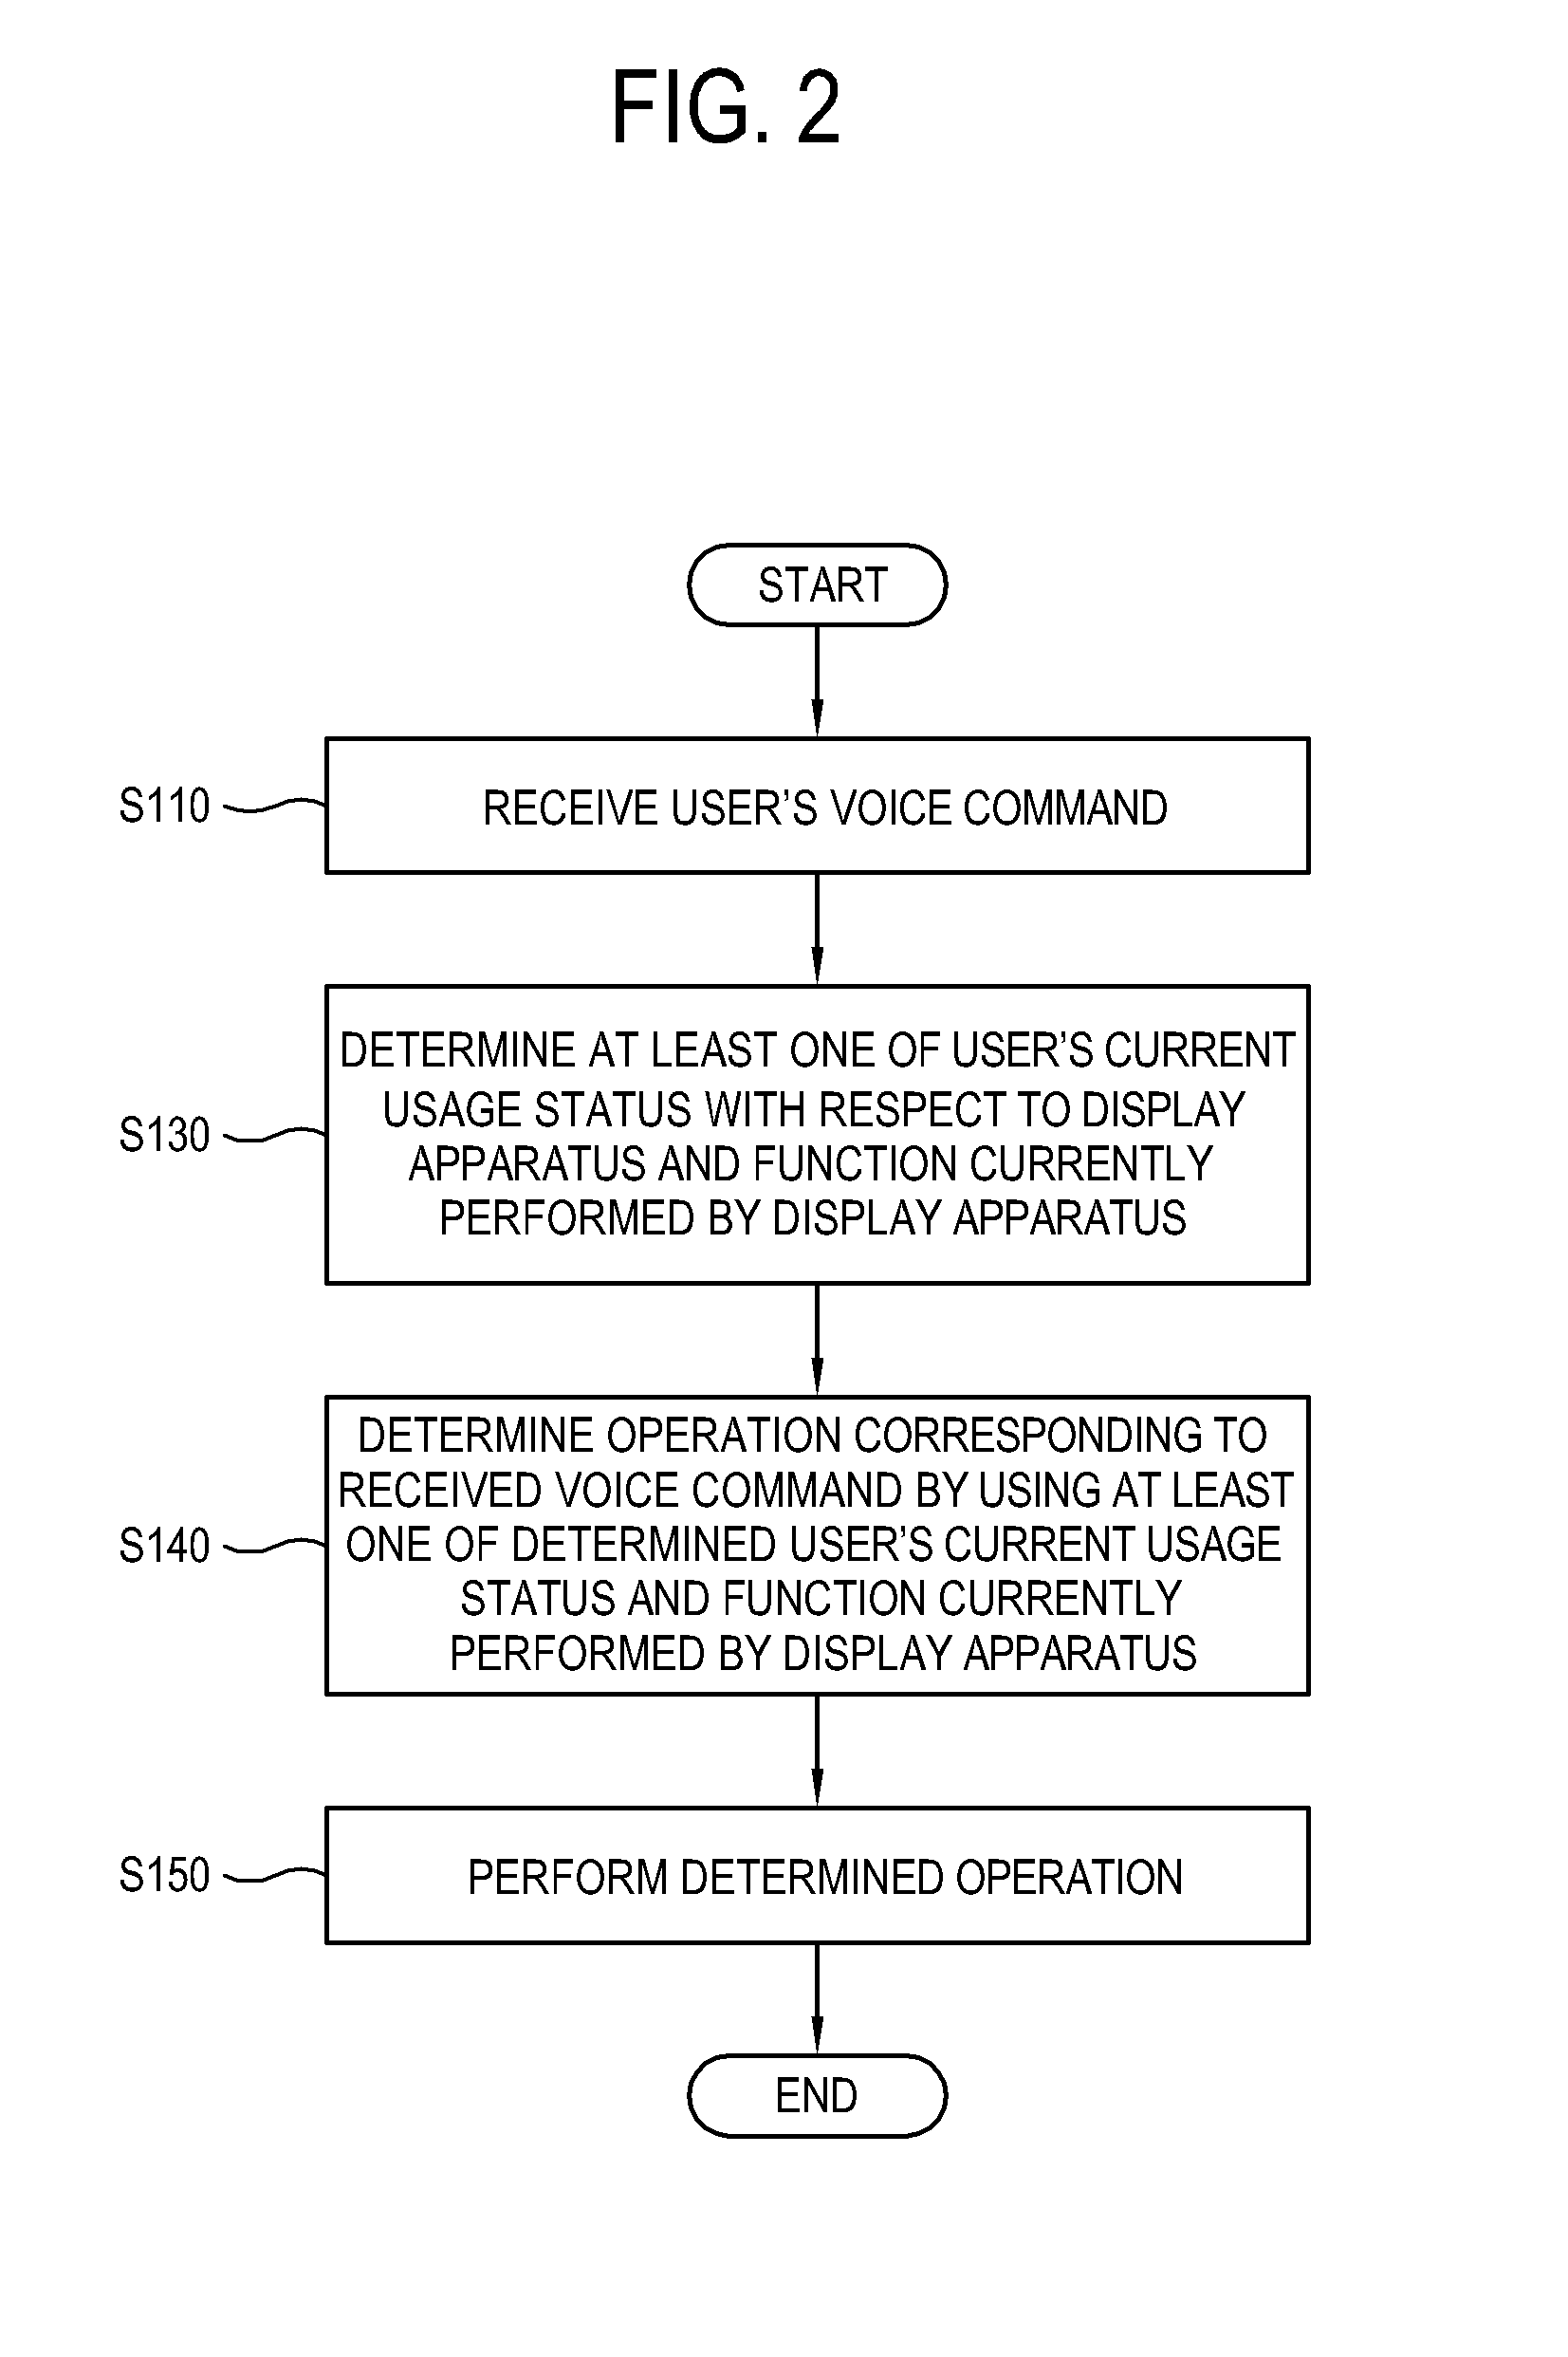 Voice recognition system, voice recognition server and control method of display apparatus